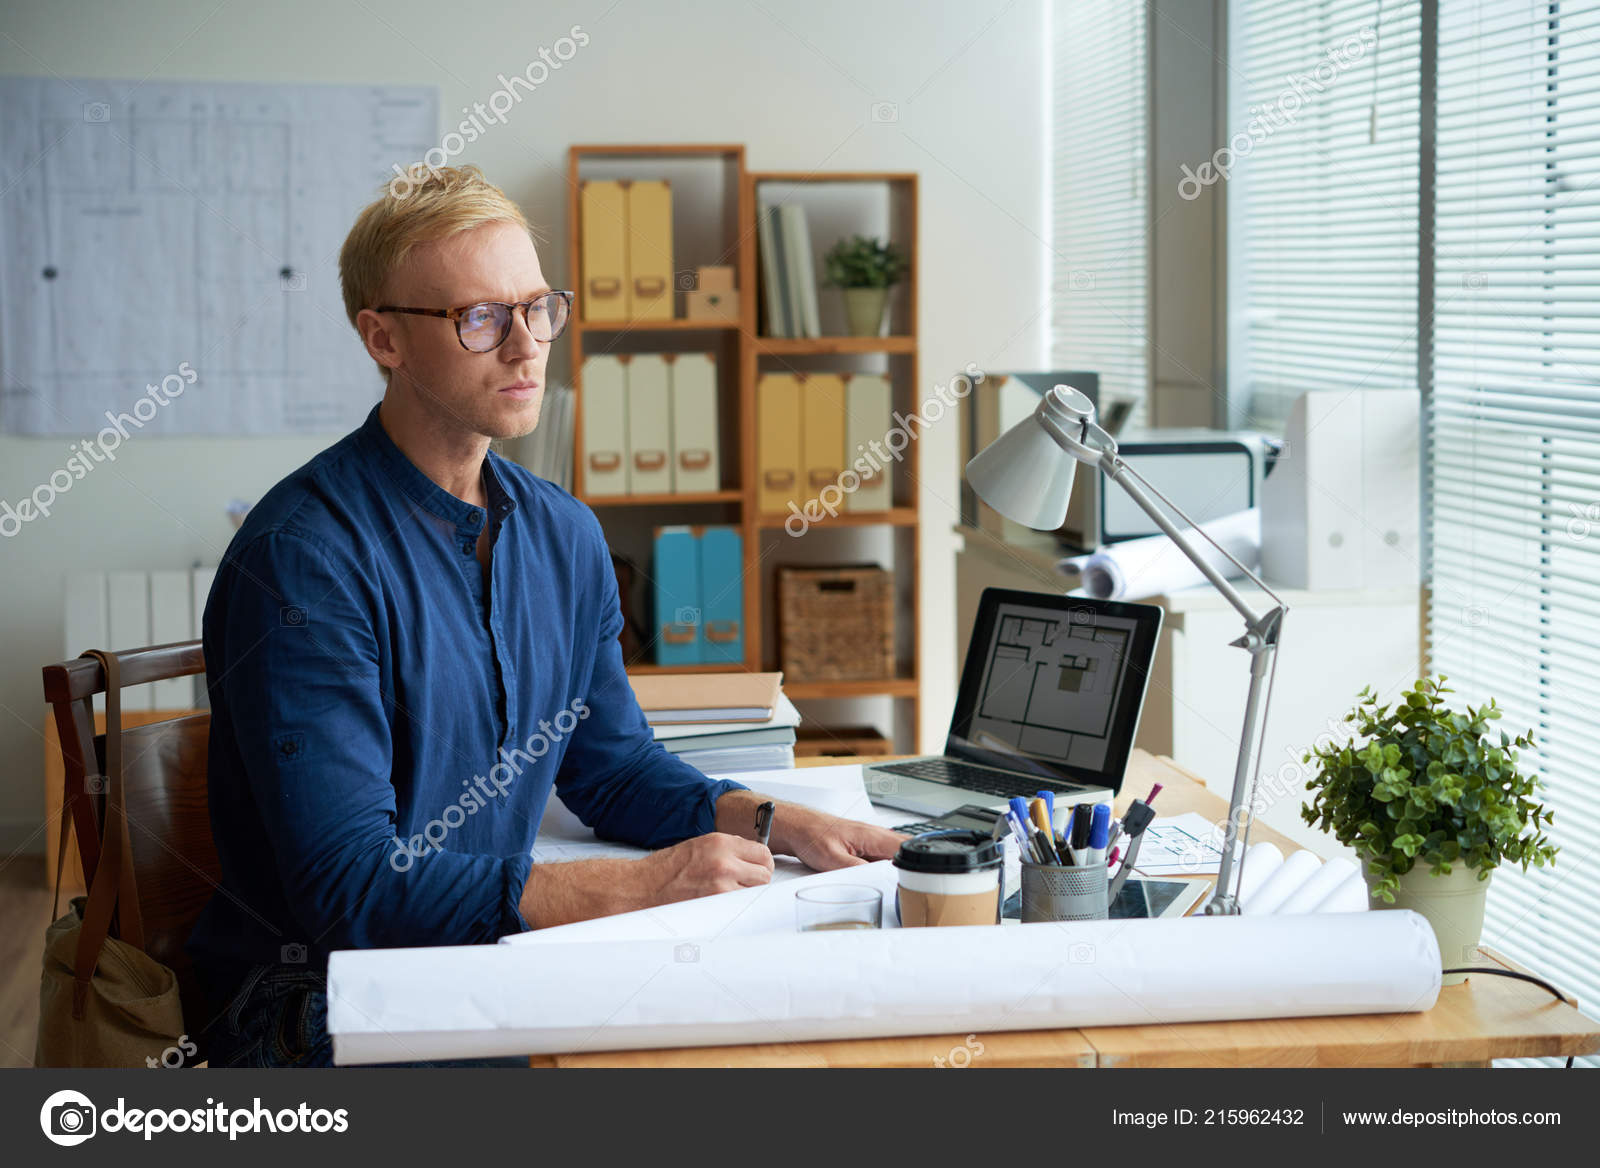 Toeval passage spleet Professional Young Architect Working Bureau Desk Blueprint Digital Tablet  Stock Photo by ©DragonImages 215962432